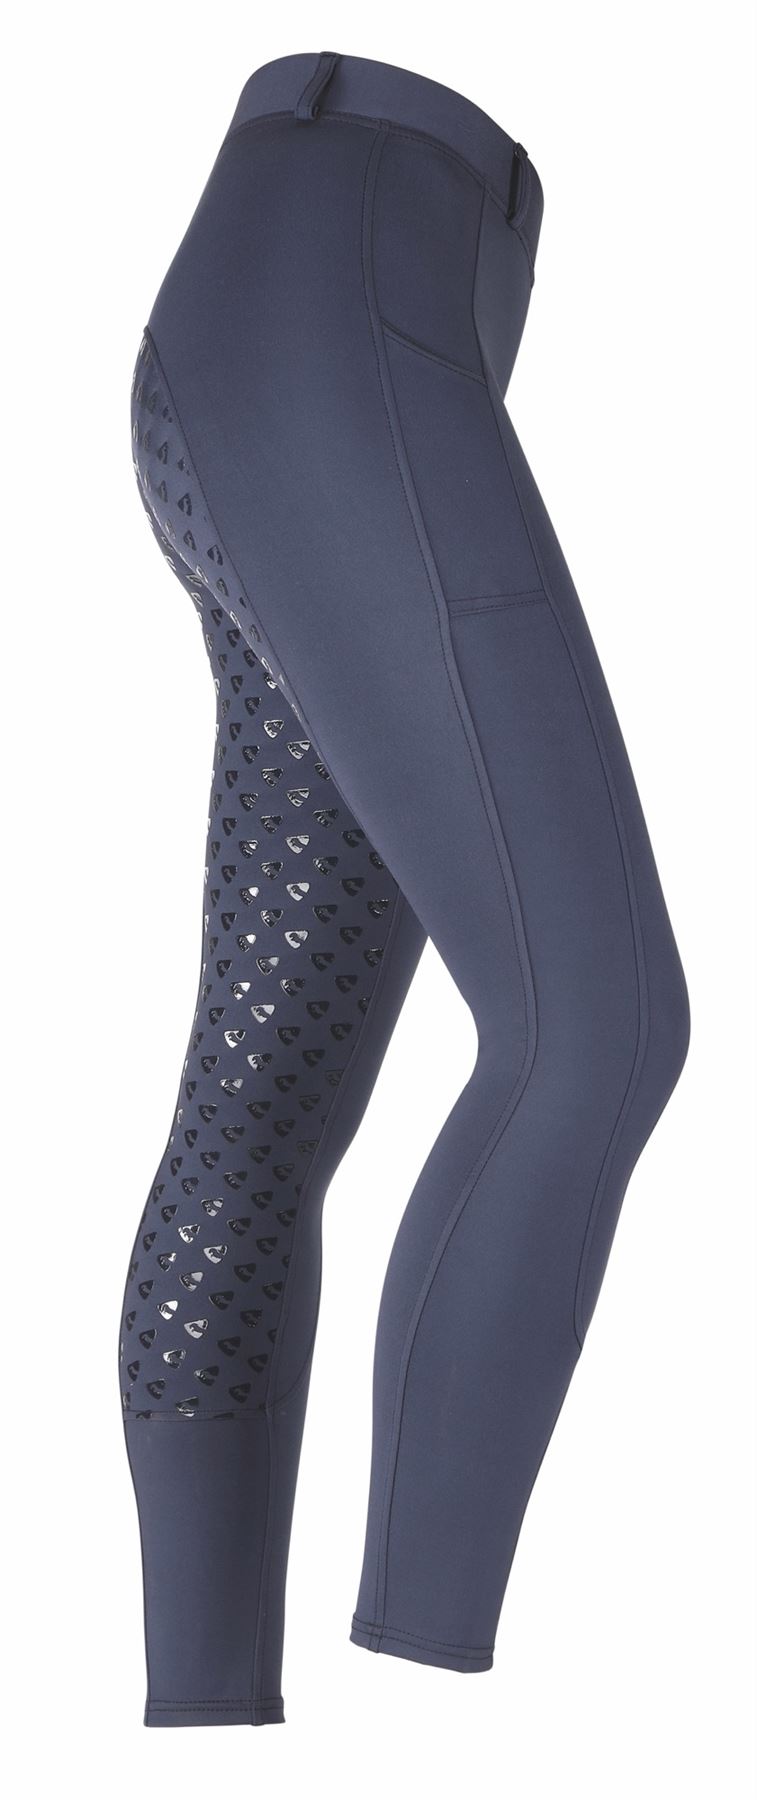 Shires Aubrion Albany Riding Tights - Ladies - Just Horse Riders